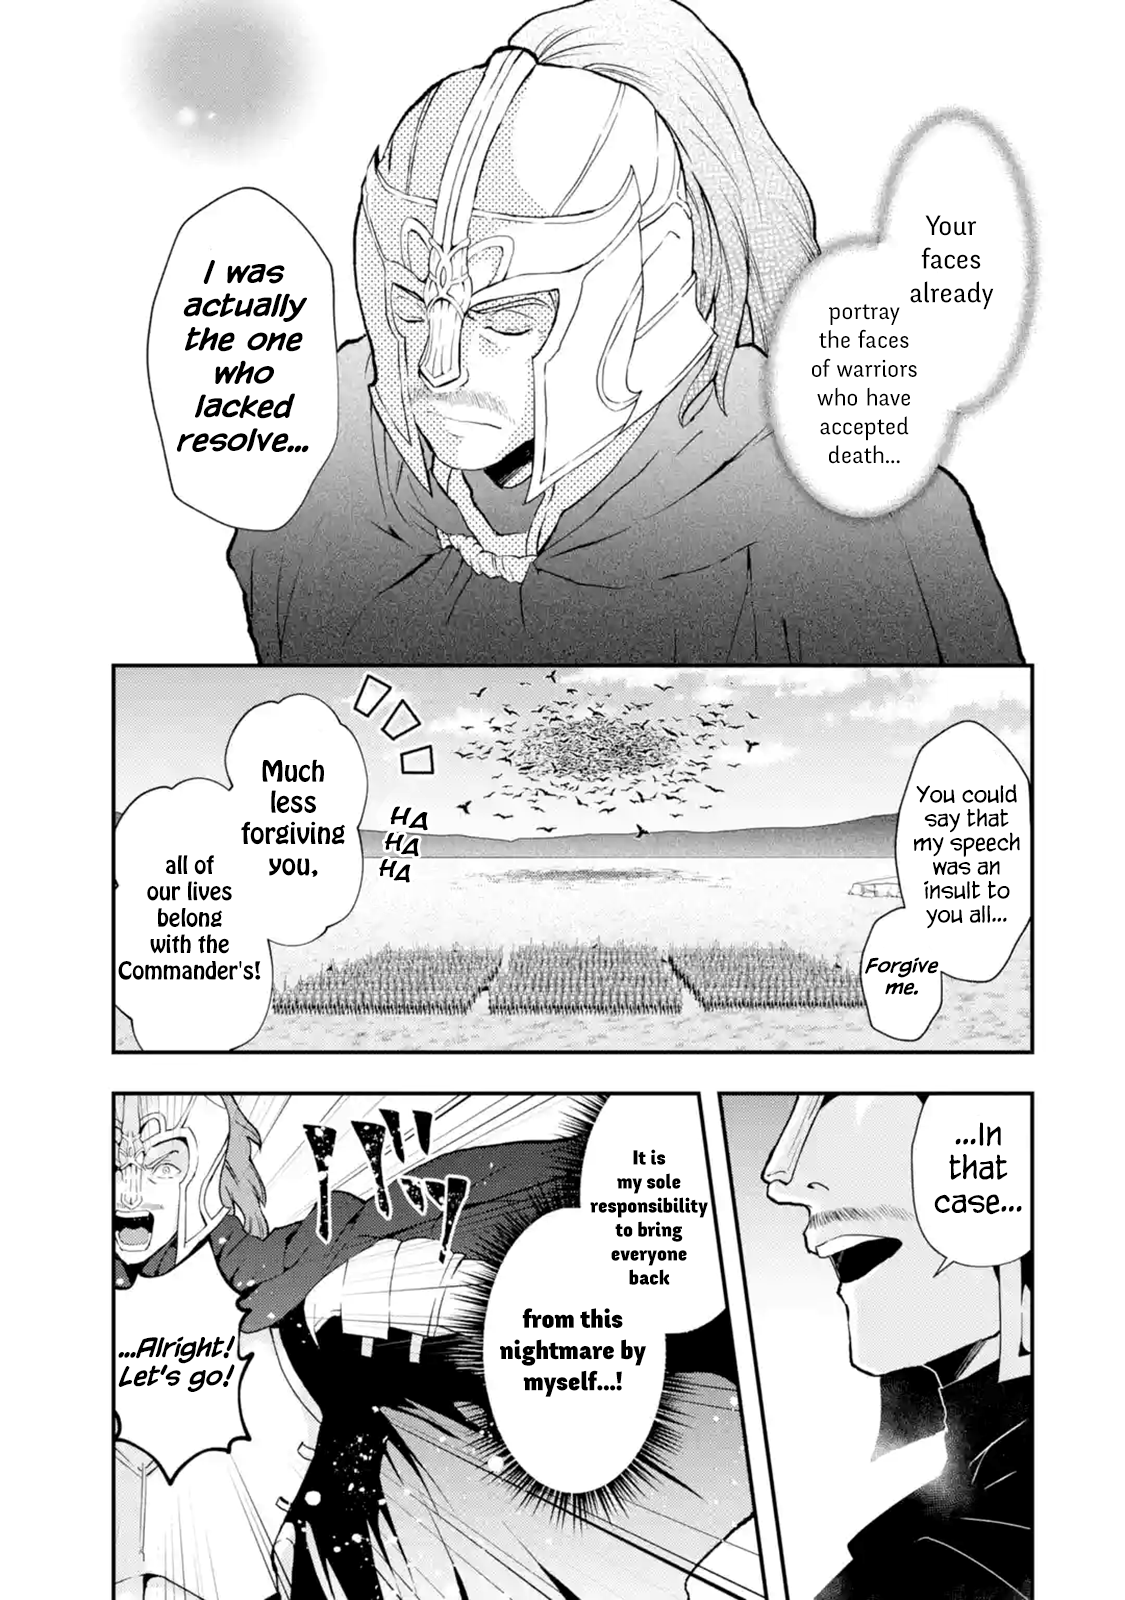 That Inferior Knight, Lv. 999 - Page 2